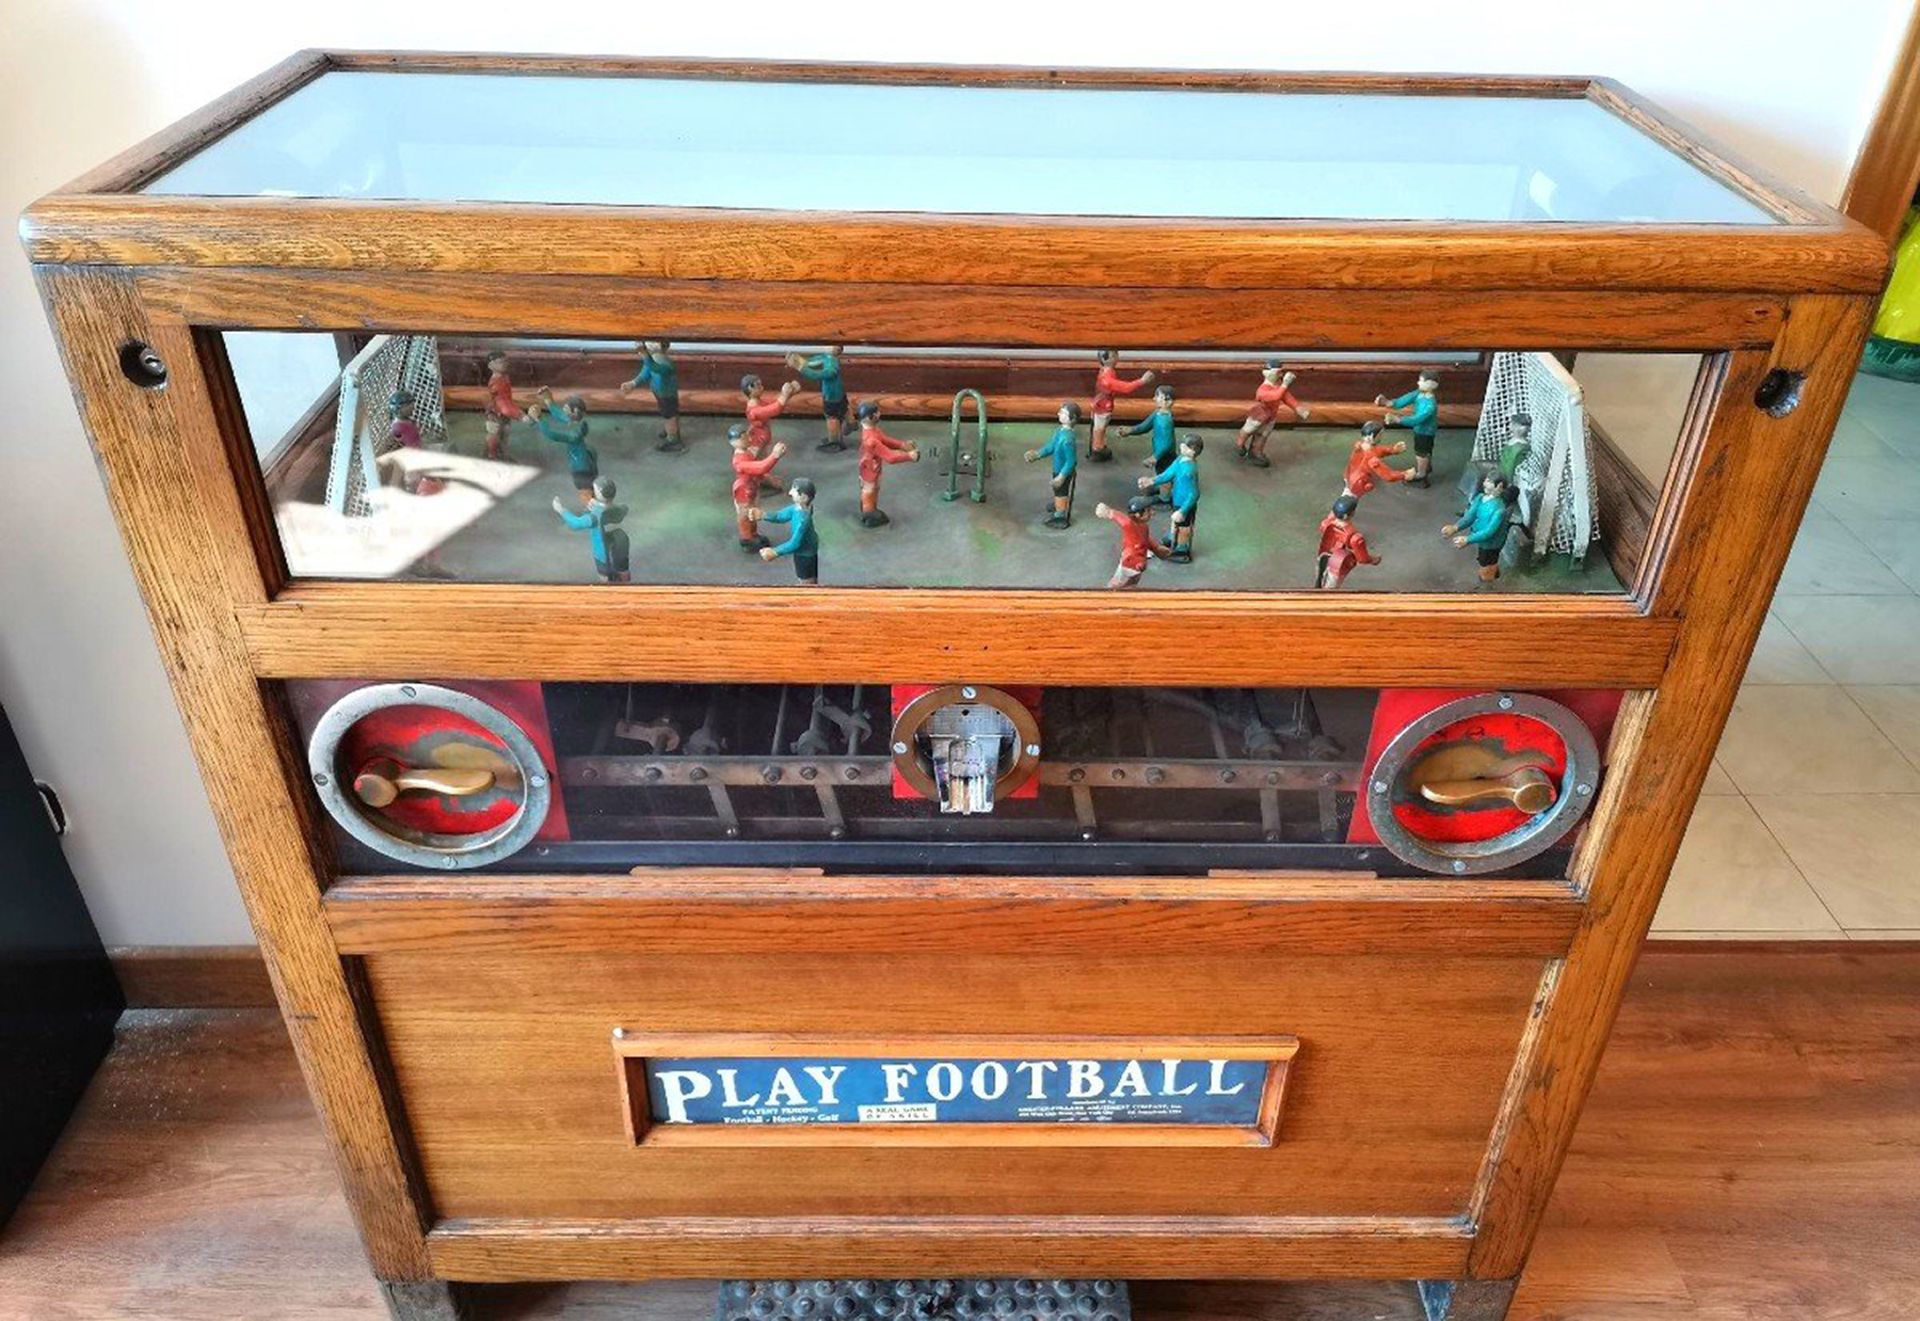 Mechanical football game from the 1930s